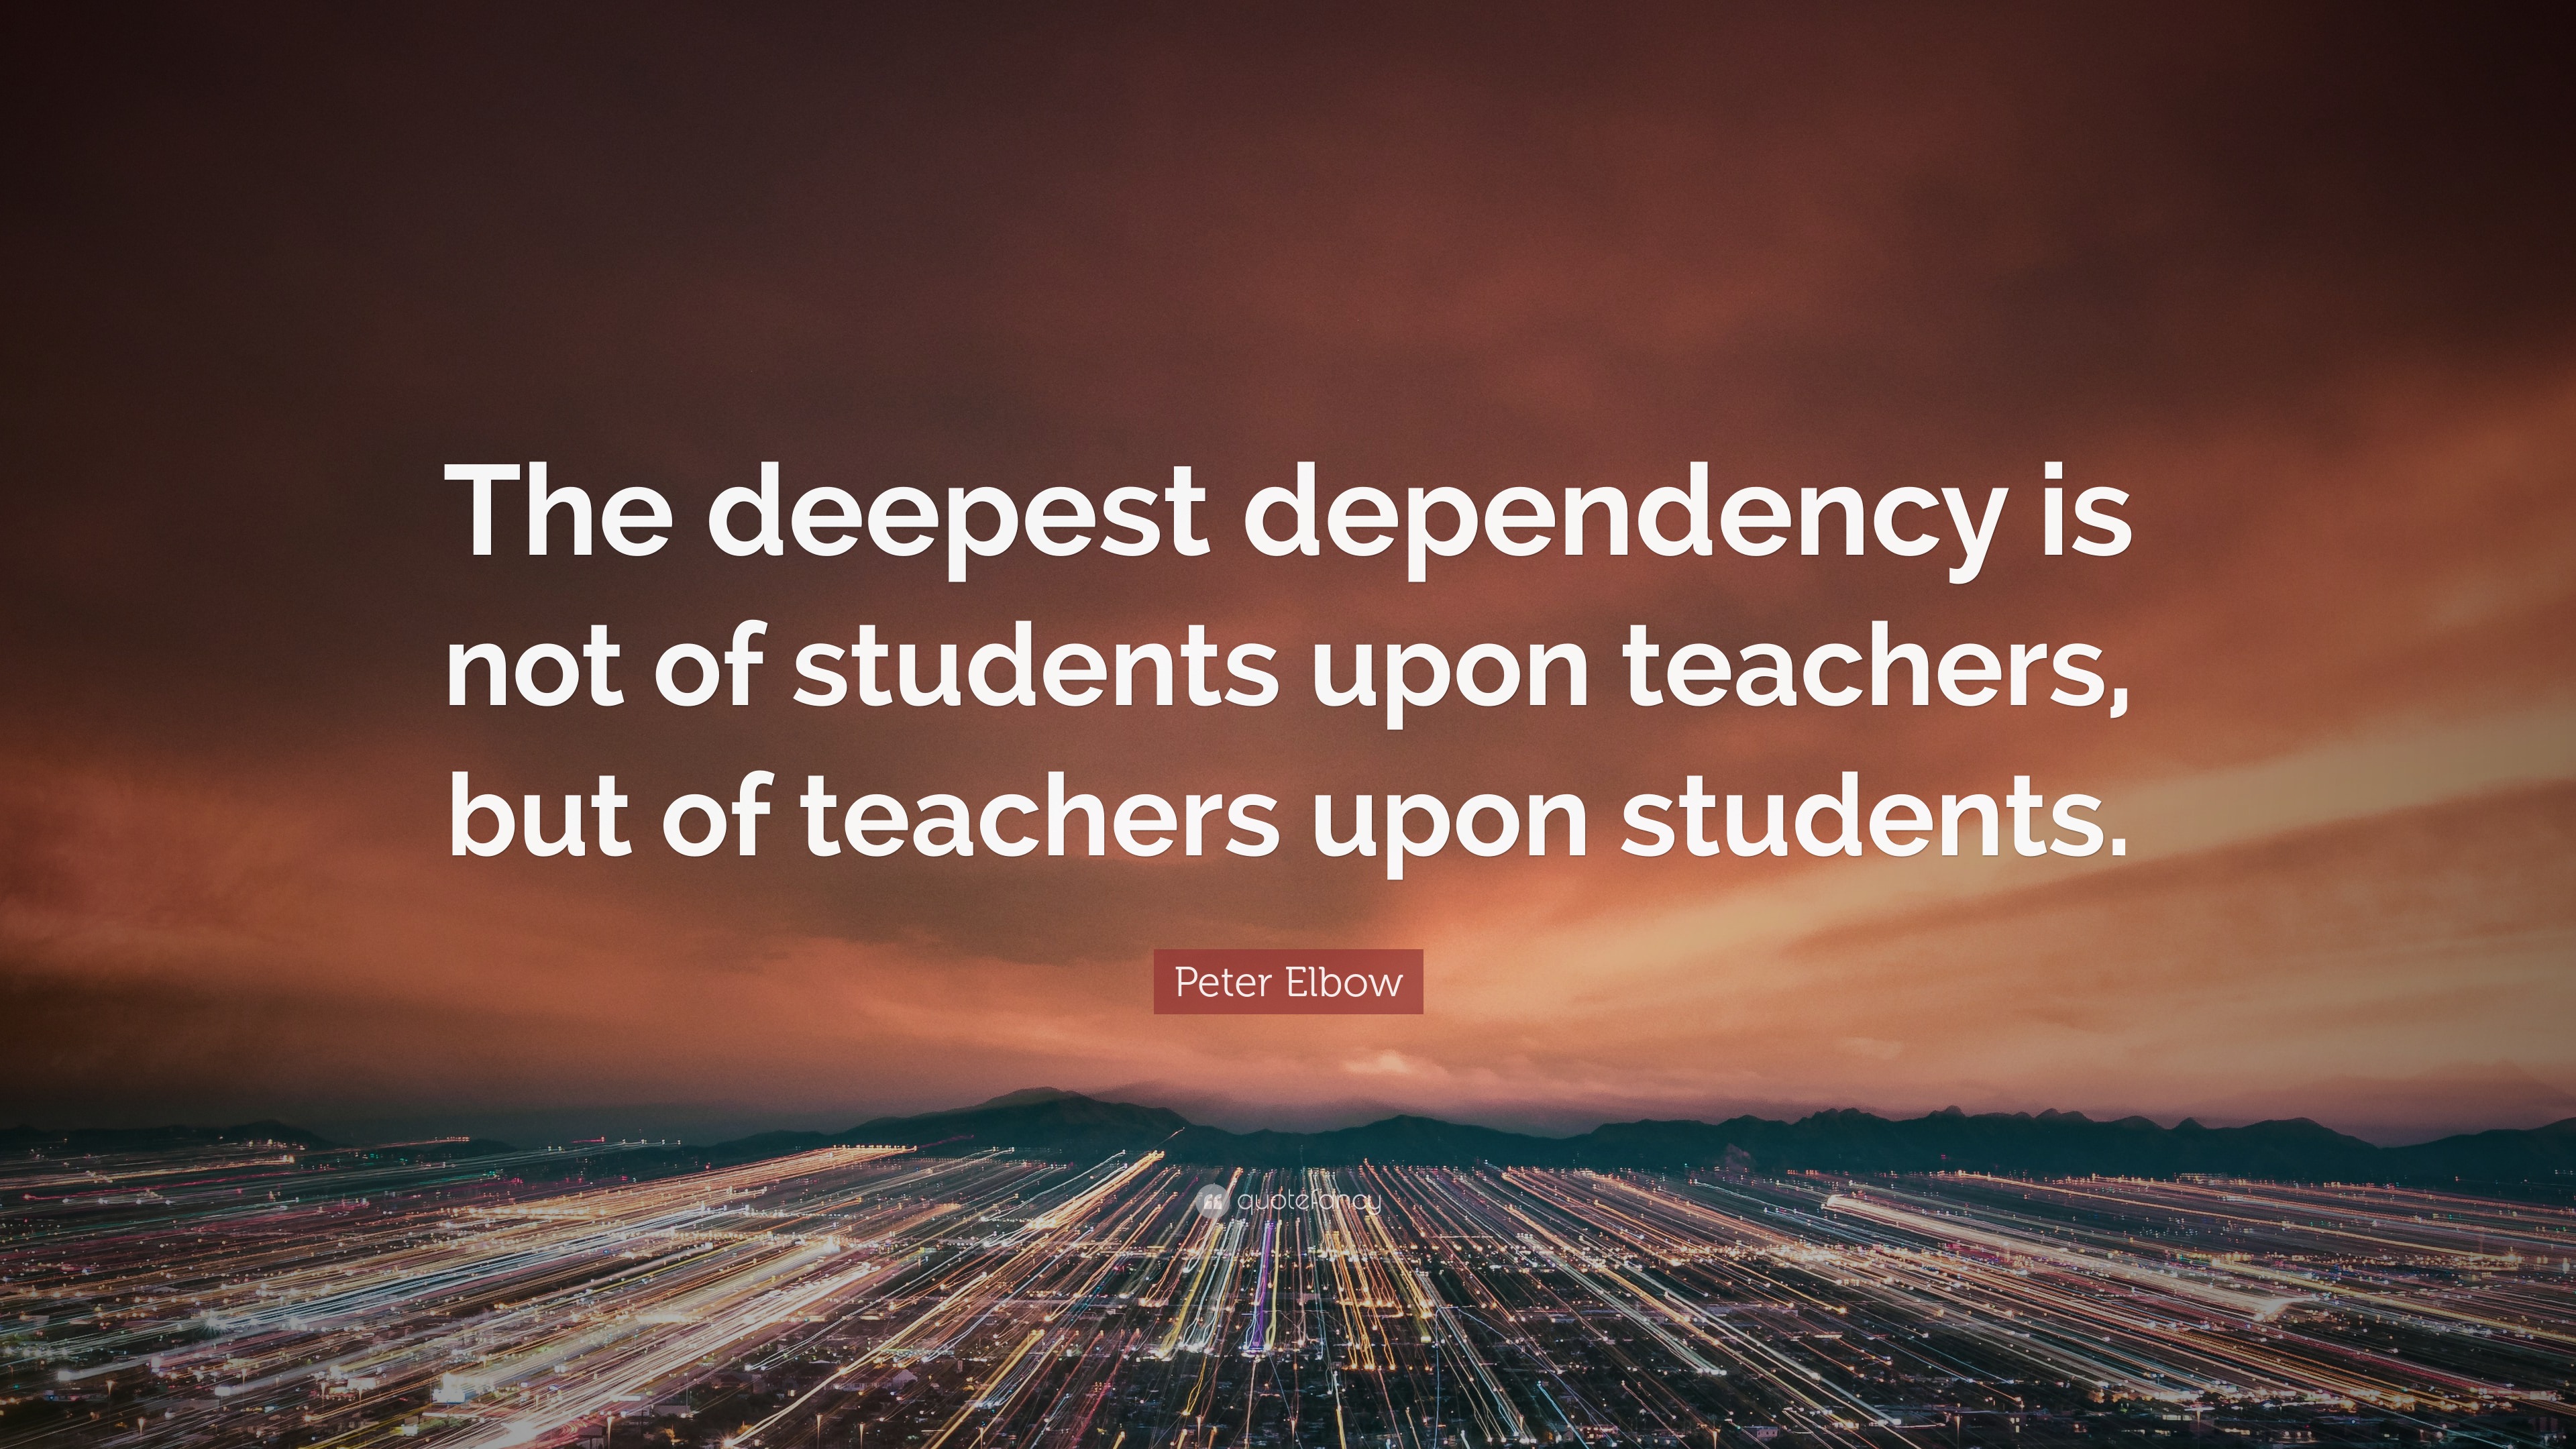 Peter Elbow Quote: “The deepest dependency is not of students upon ...